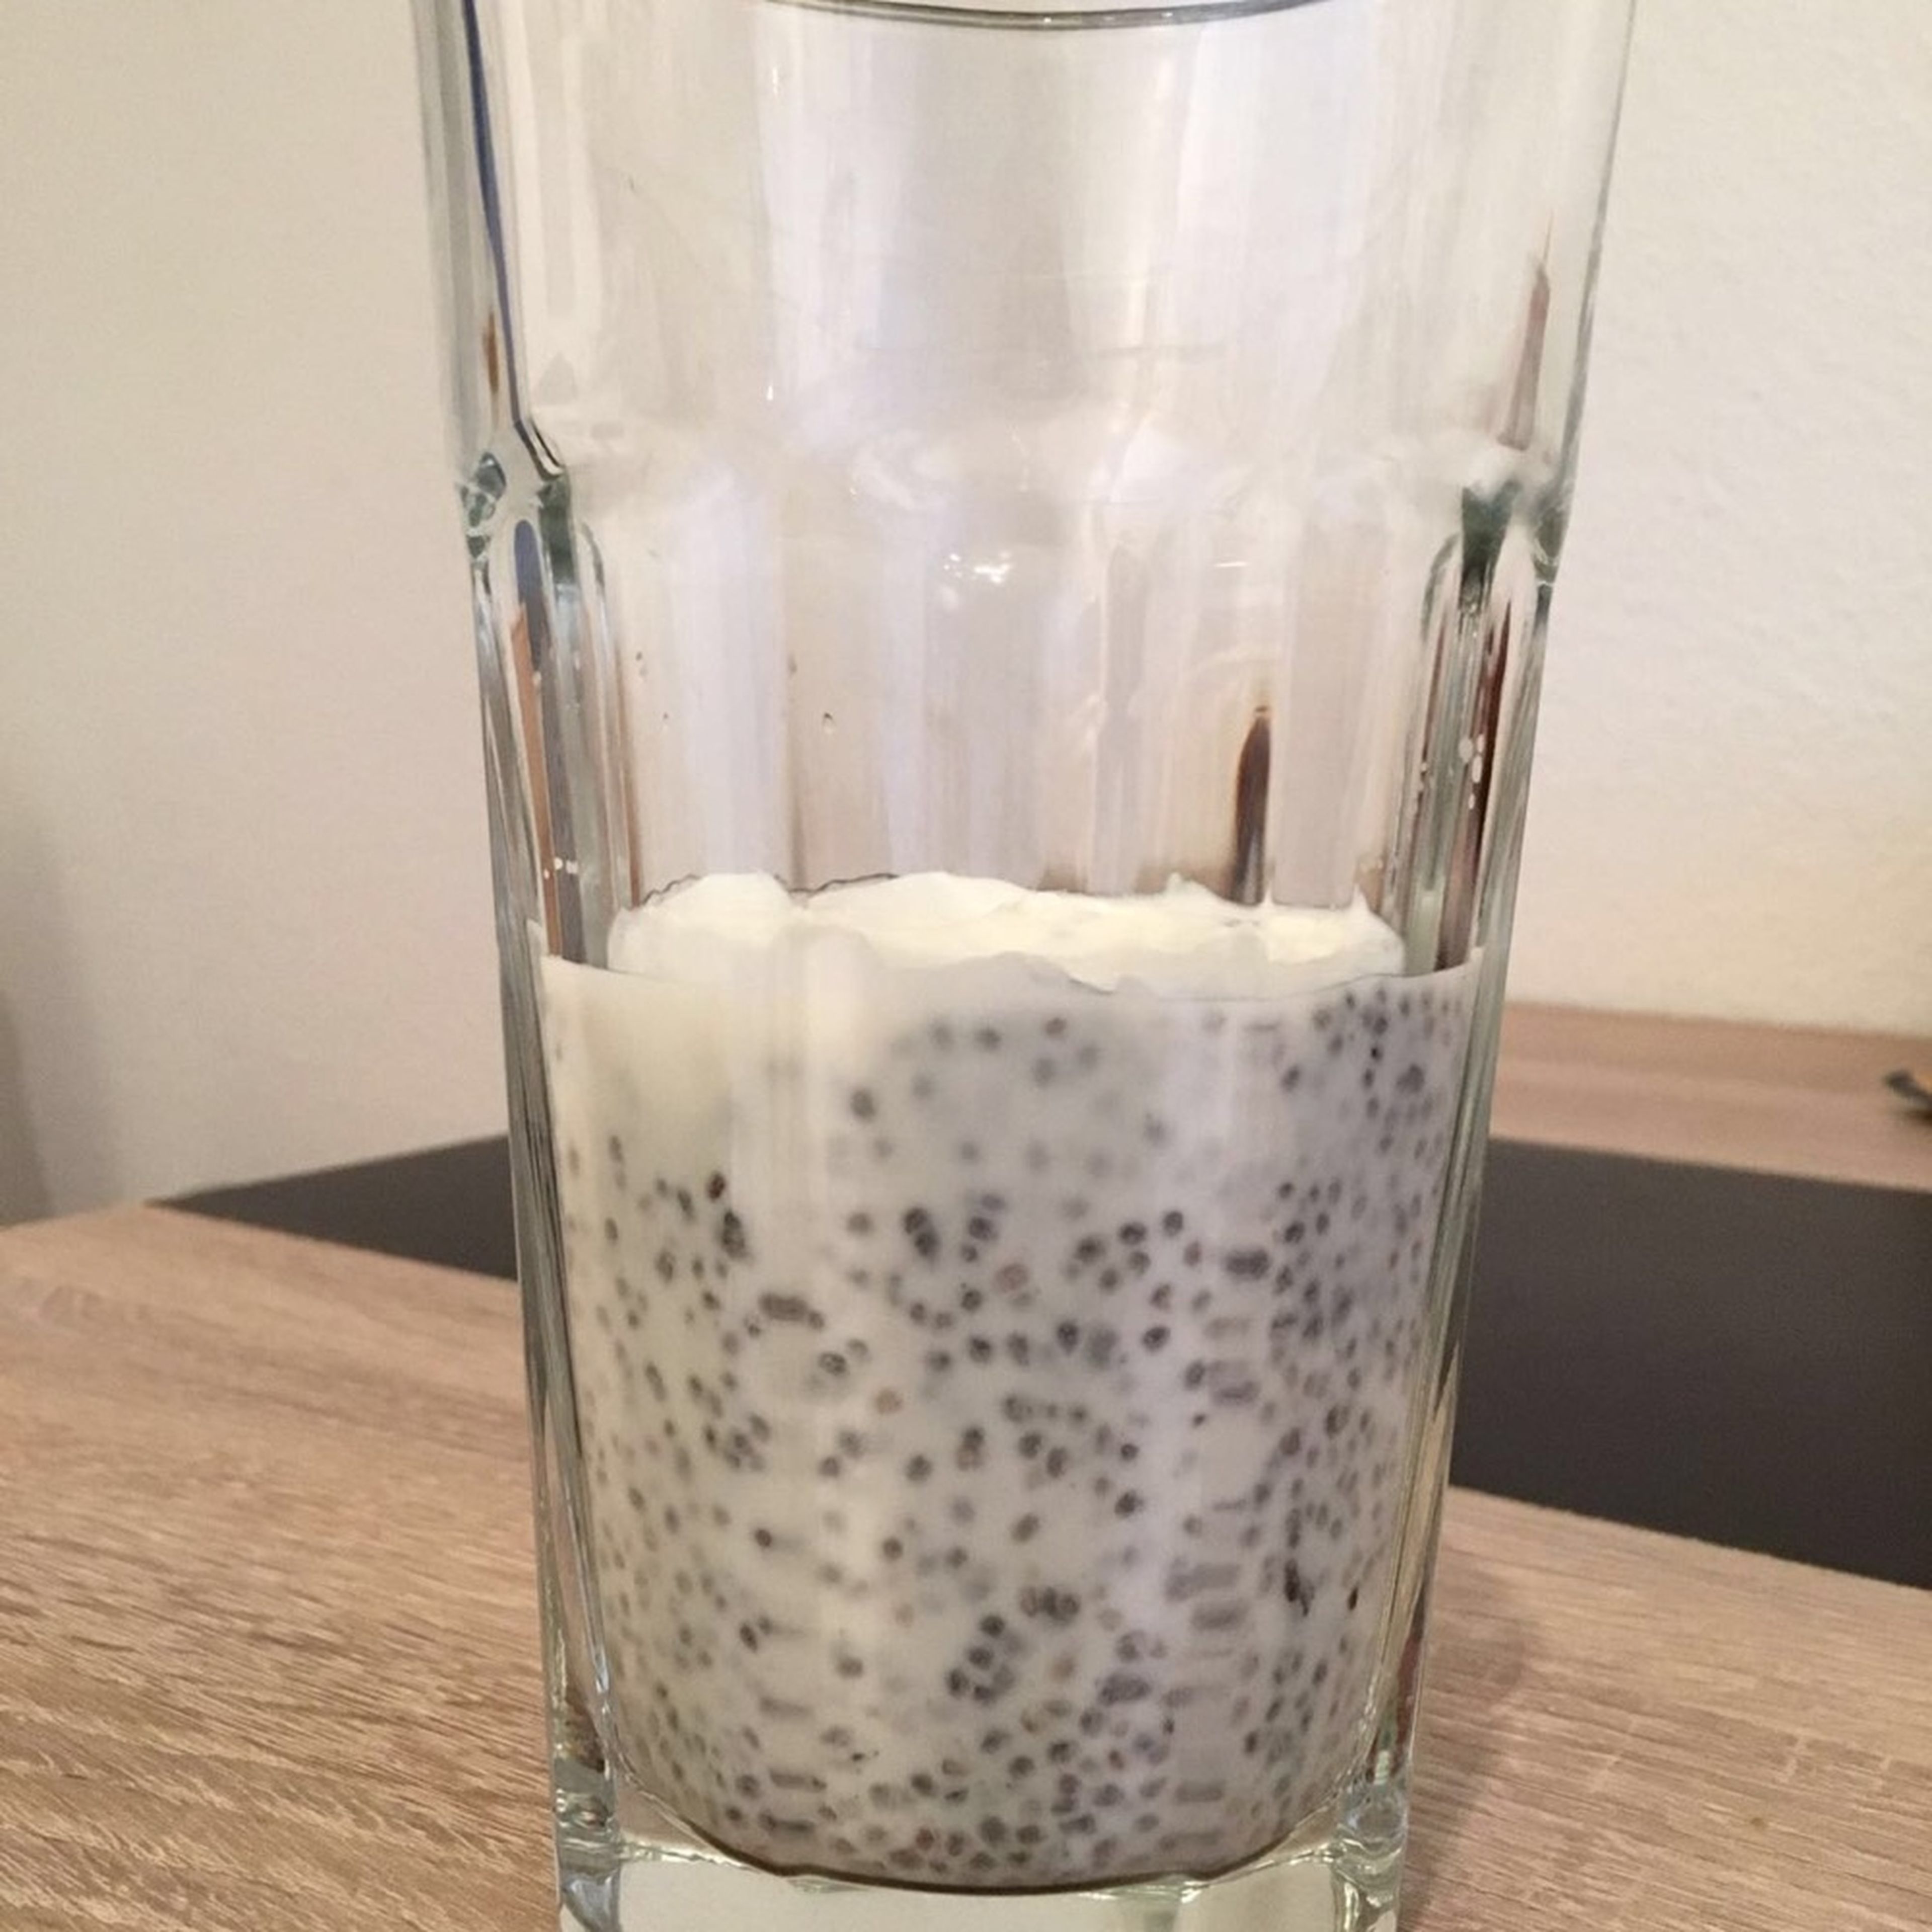 Add soy yogurt alternative to the soaked chia seeds and stir to combine.